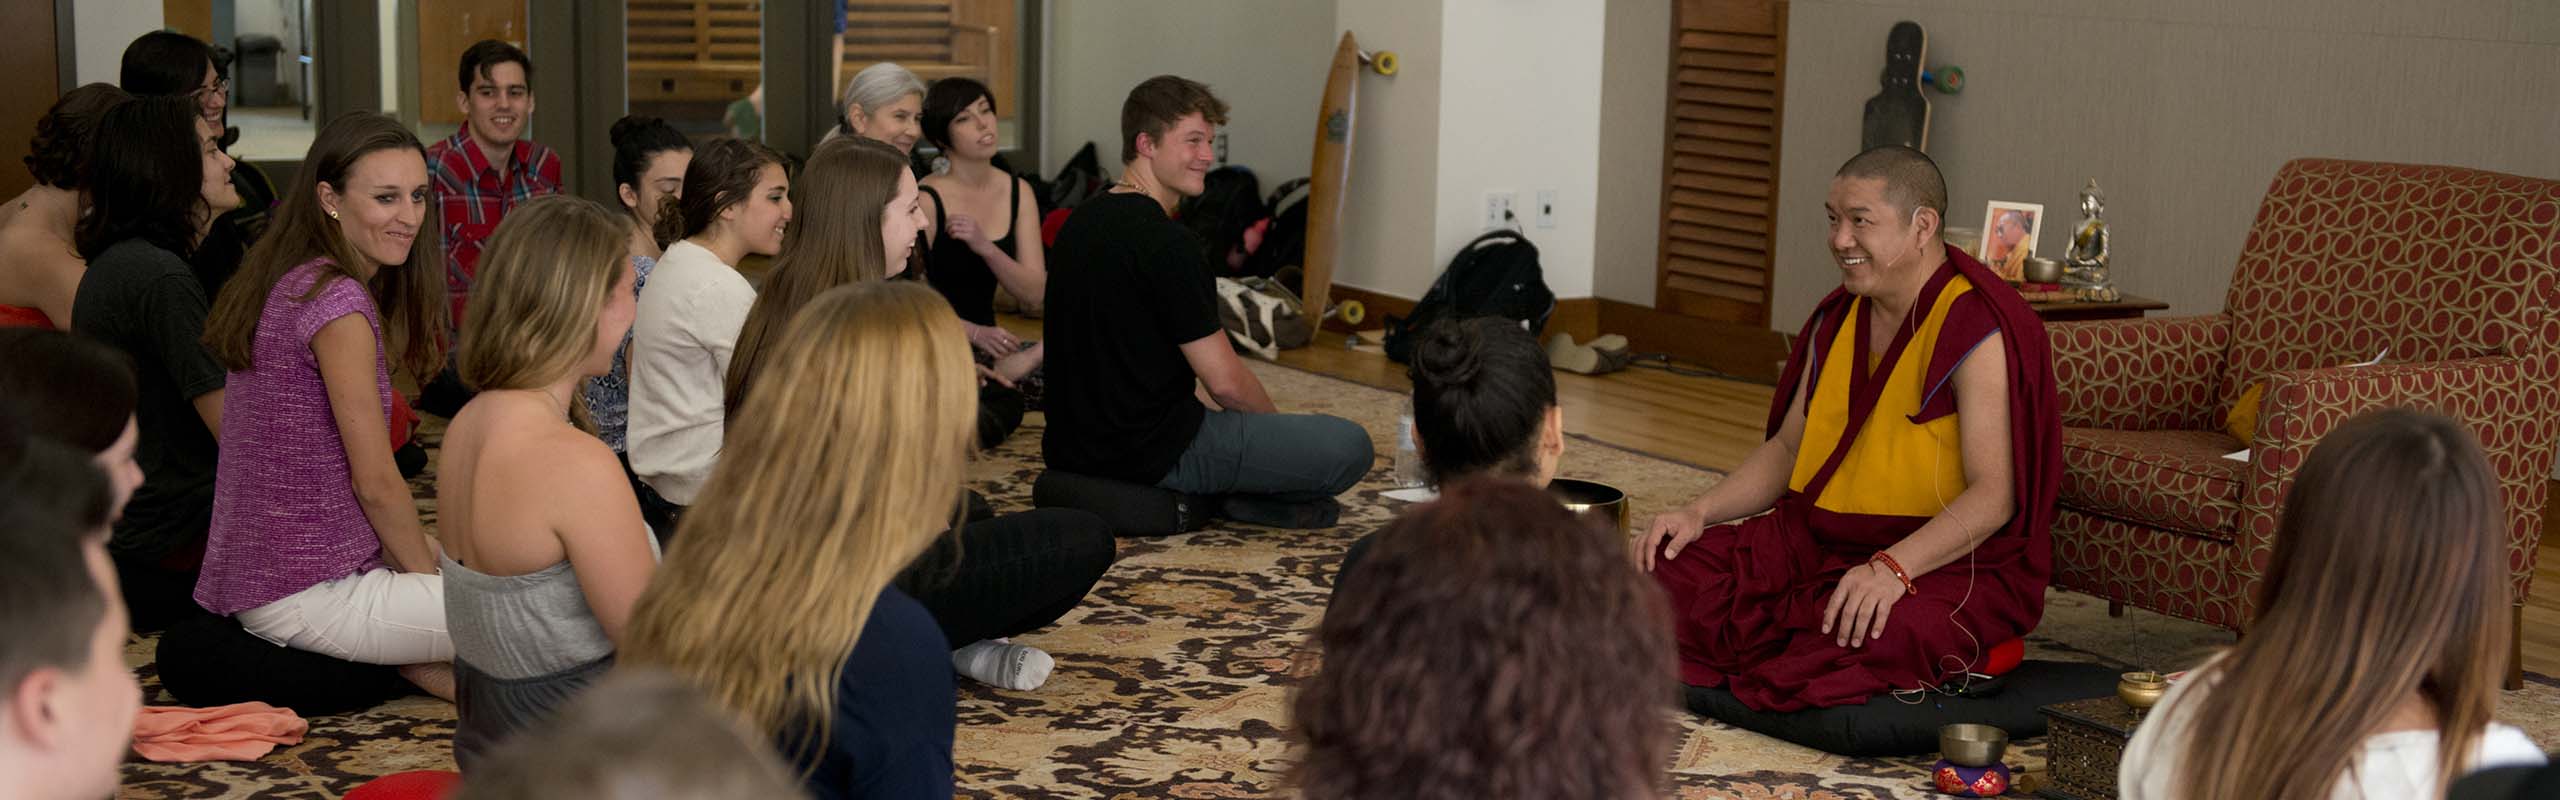 Buddhist monk Geshe Gelek, the resident teacher at the Kadampa Center in Raleigh, visits the Numen Lumen Pavilion to lead a meditation session.